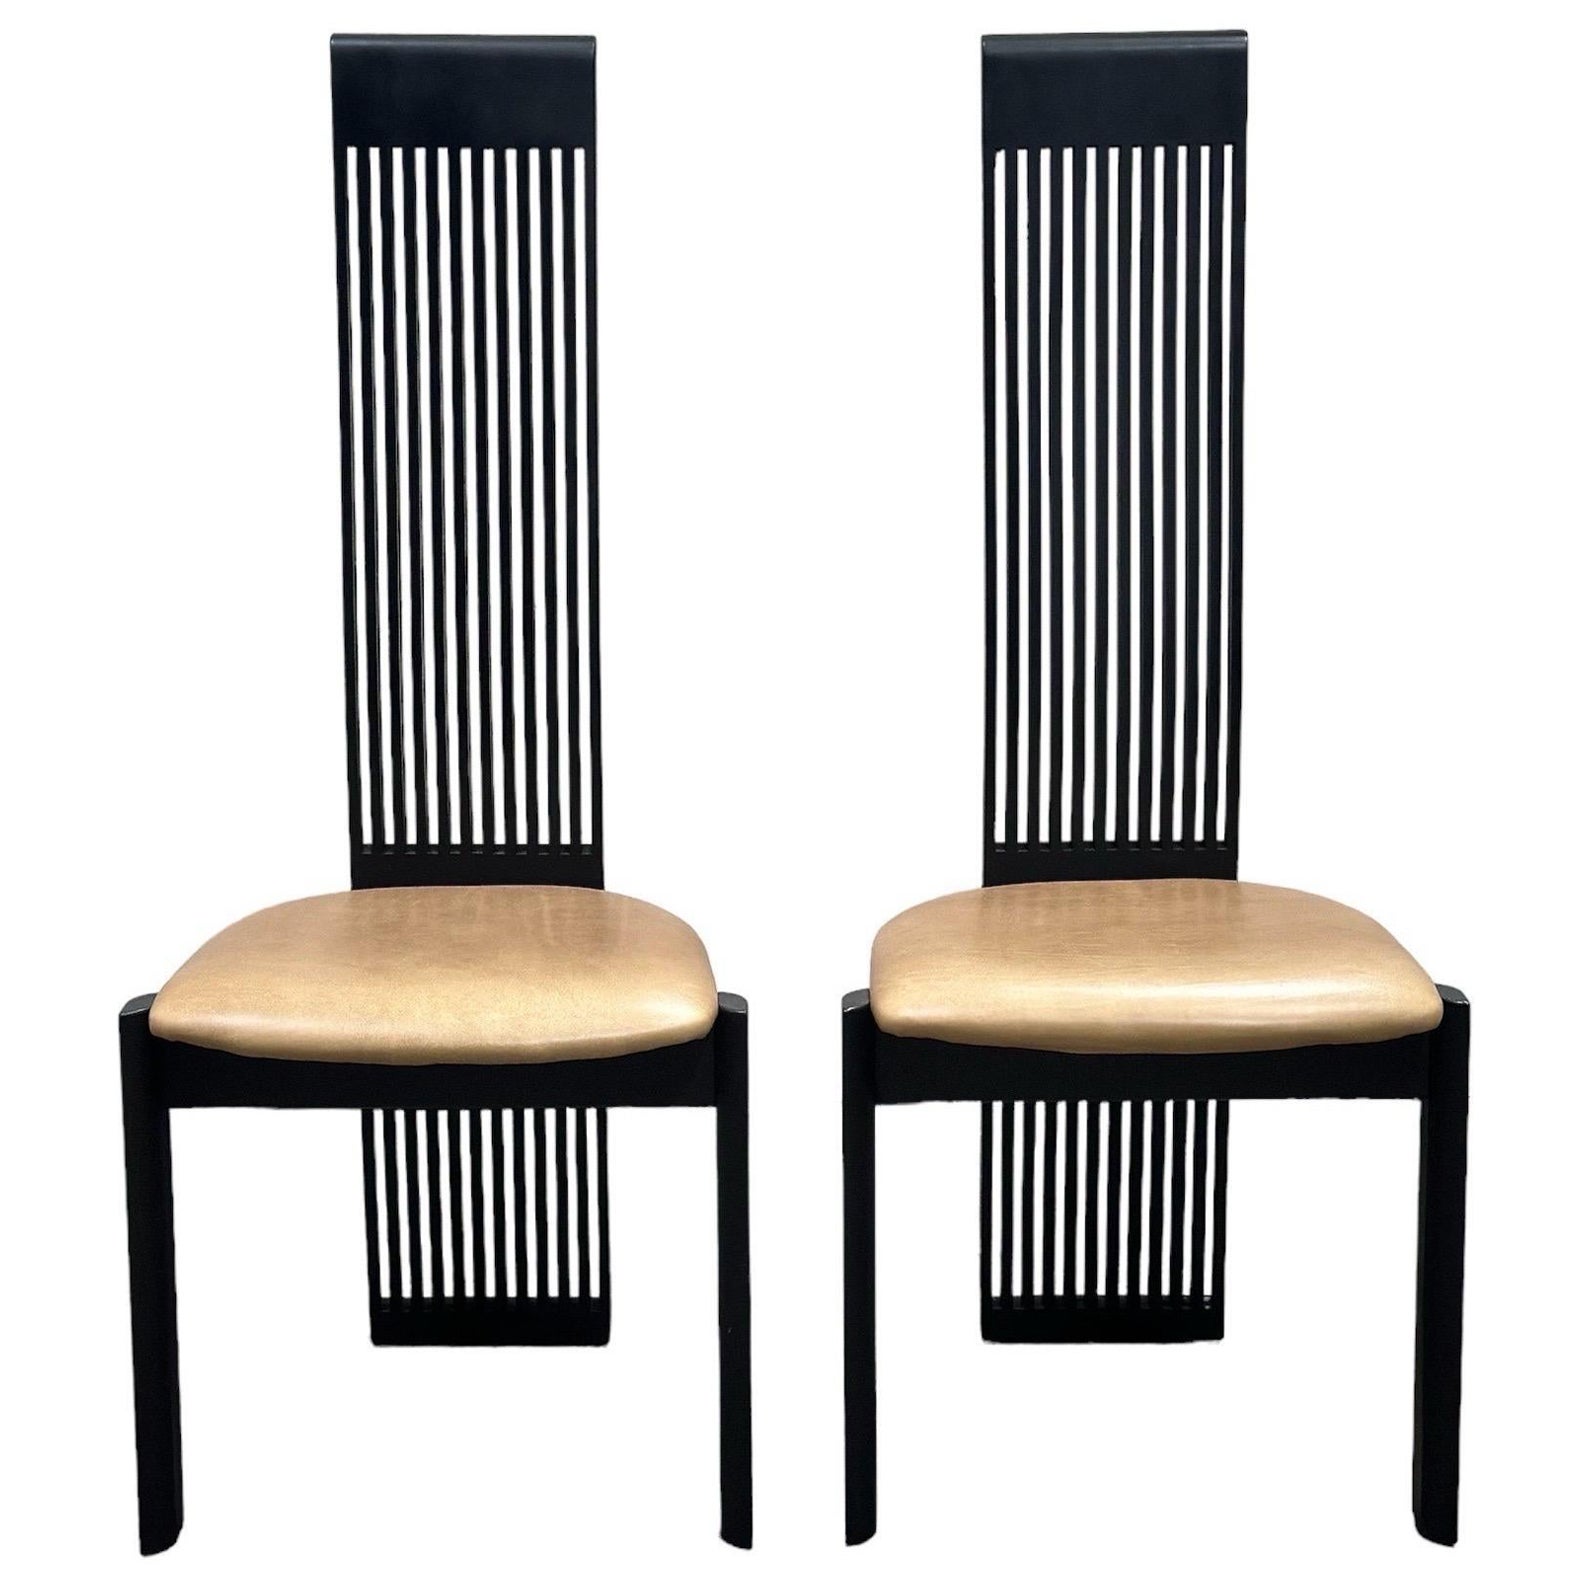 Post Modern High Back Leather Dining Chairs - Pietro Consantini - One Pair (2) For Sale